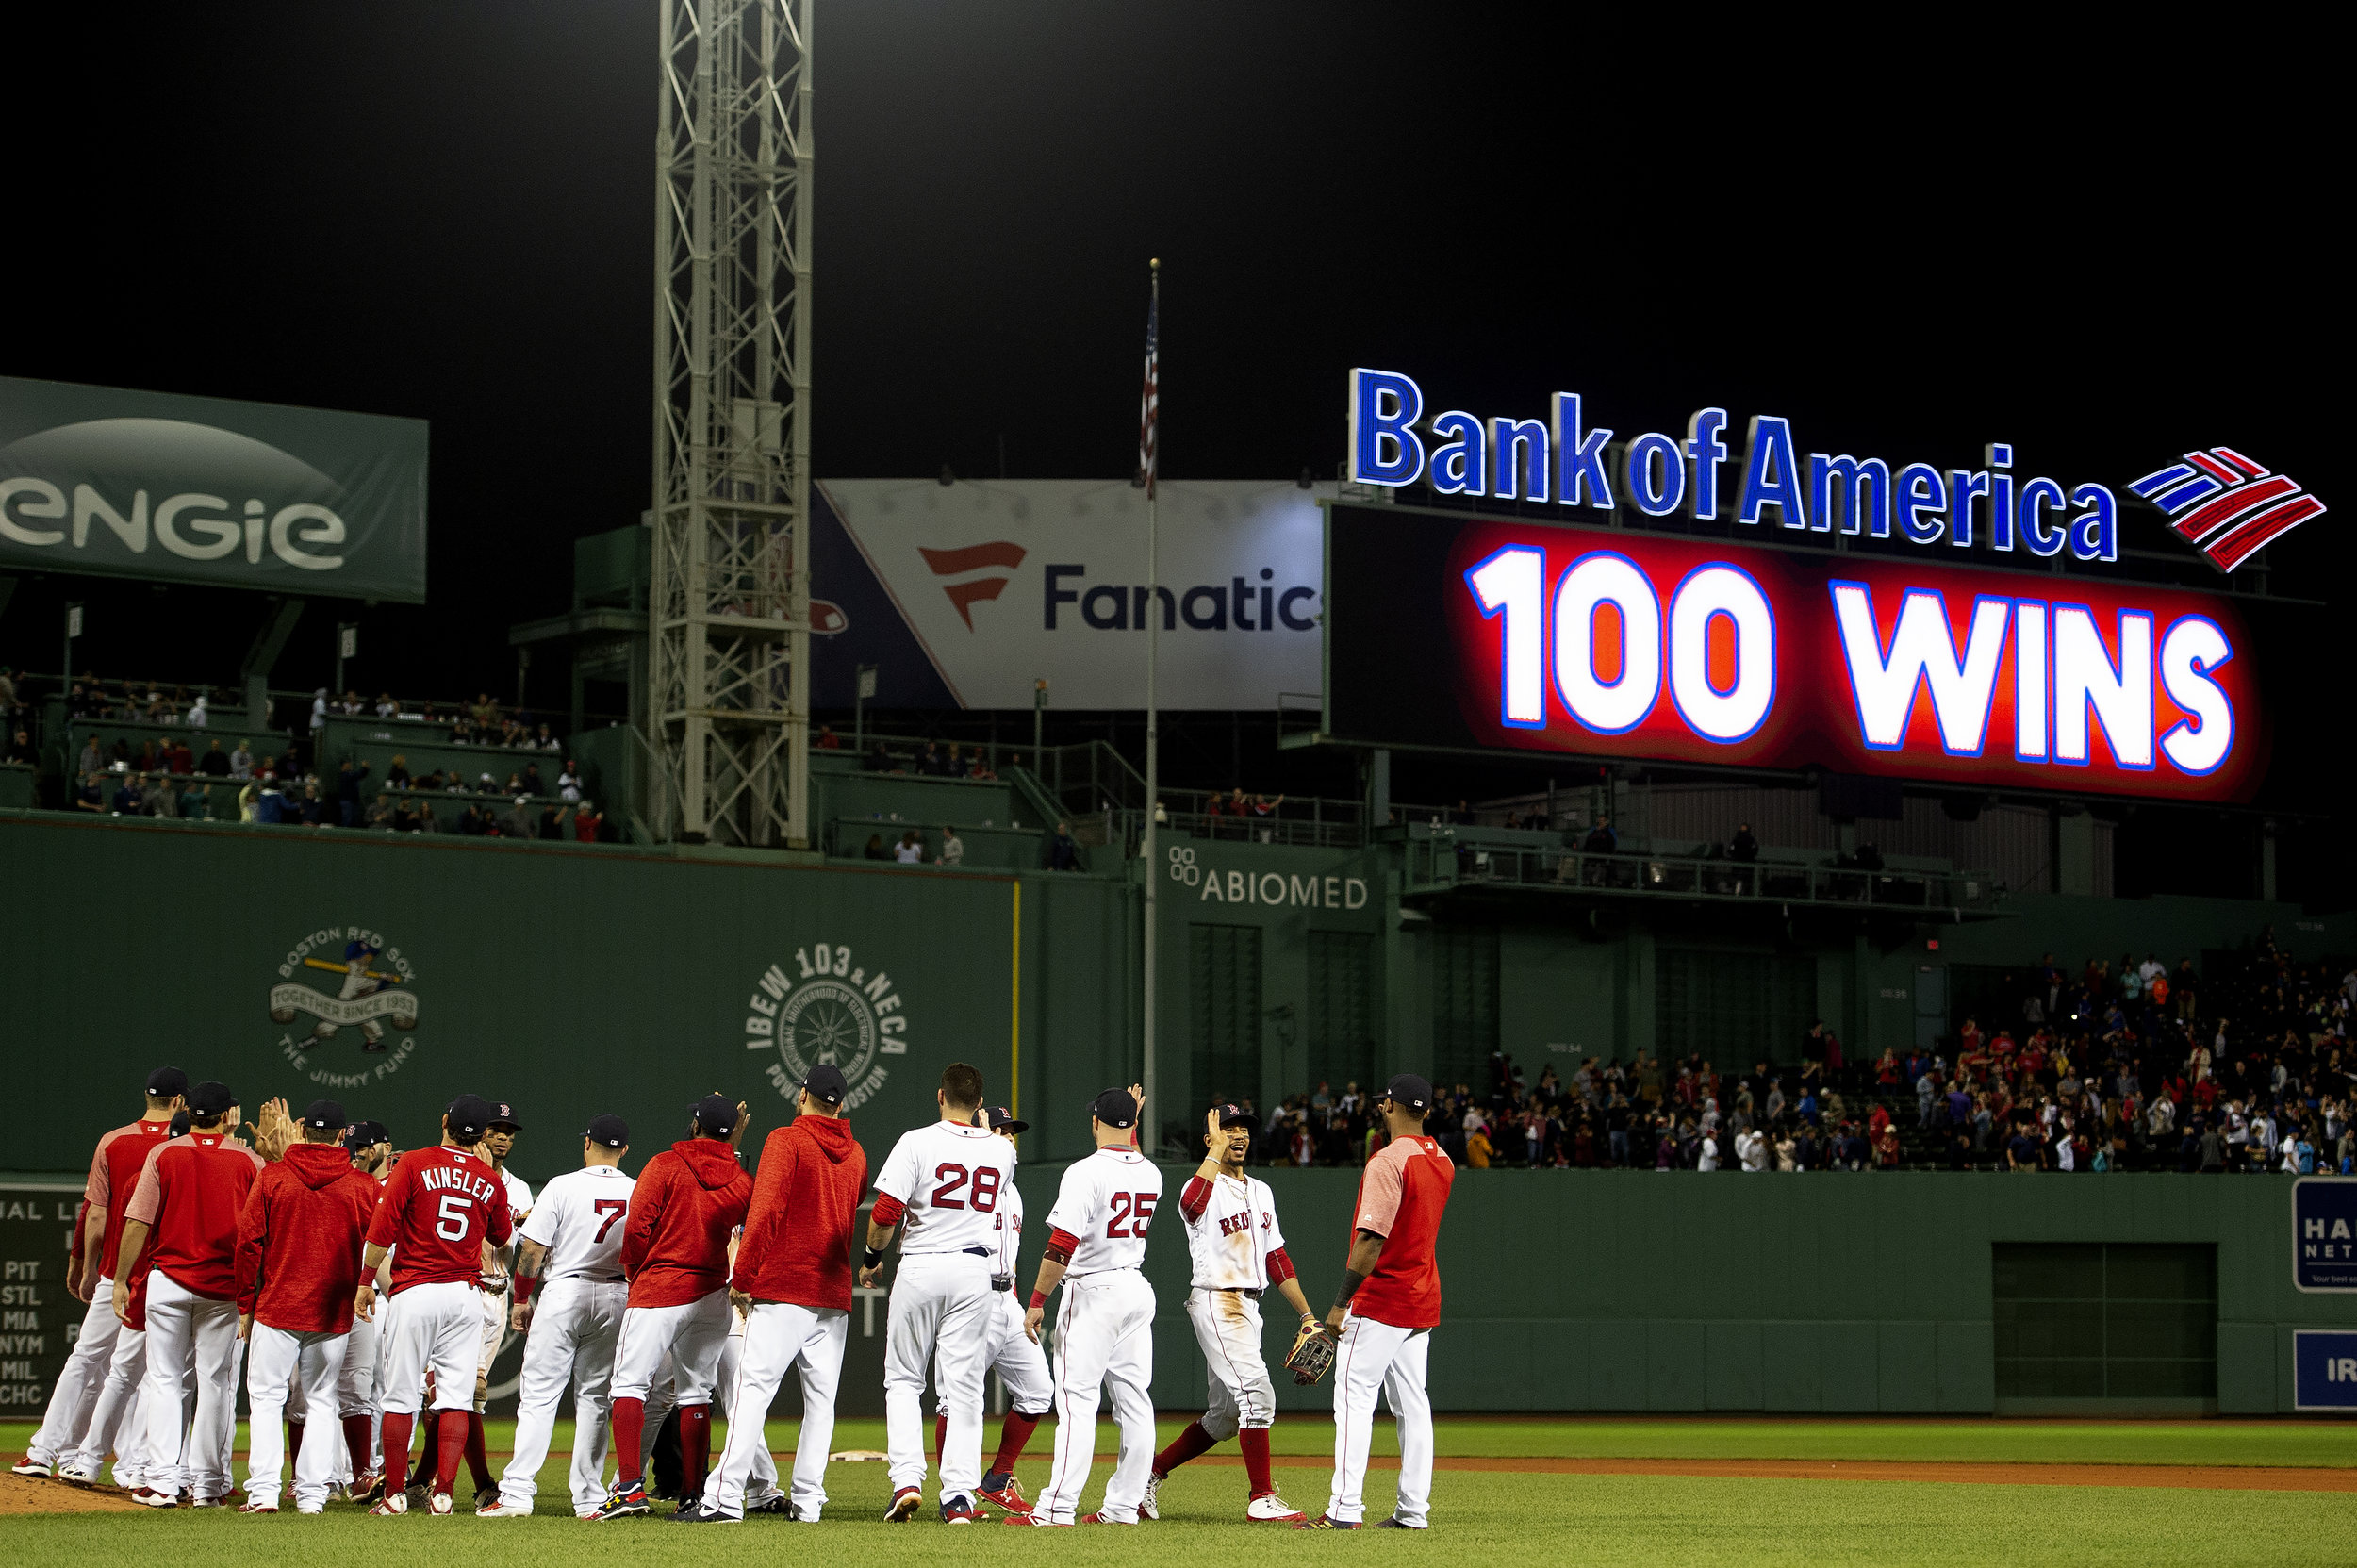  The Boston Red Sox are the first team to earn 100 wins, defeating the Toronto Blue Jays 1-0 at Fenway Park in Boston, Massachusetts Wednesday, September 12, 2018. This was their first 100-win season since 1946. 